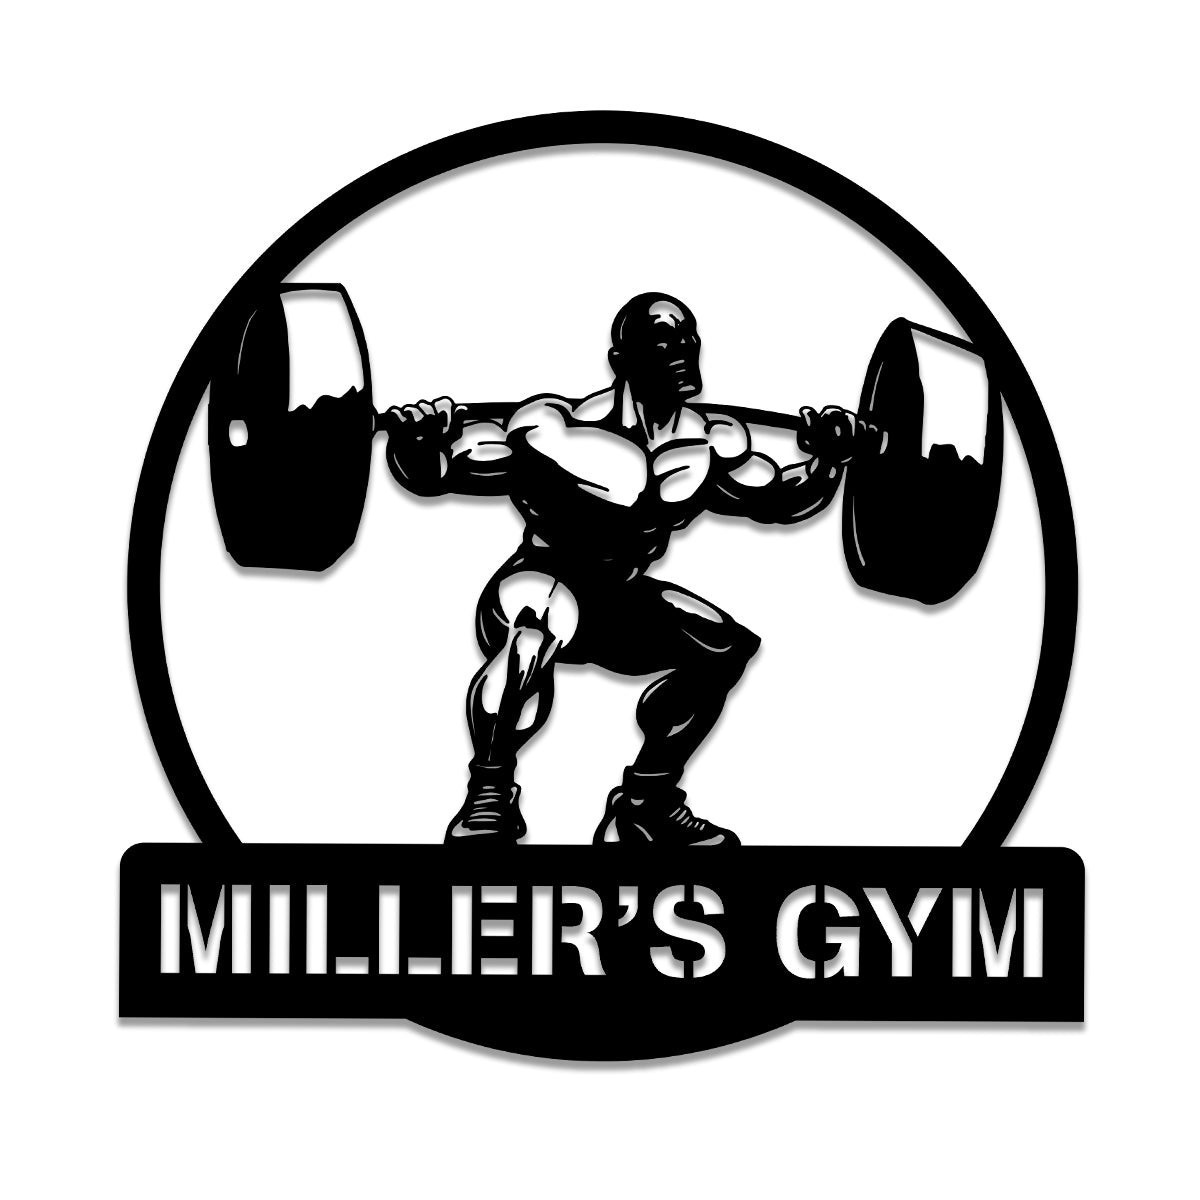 Personalized Metal Gym Sign, Fitness Center, Club, Home Wall Decor, Metal Laser Cut Metal Signs Custom Gift Ideas 12x12IN